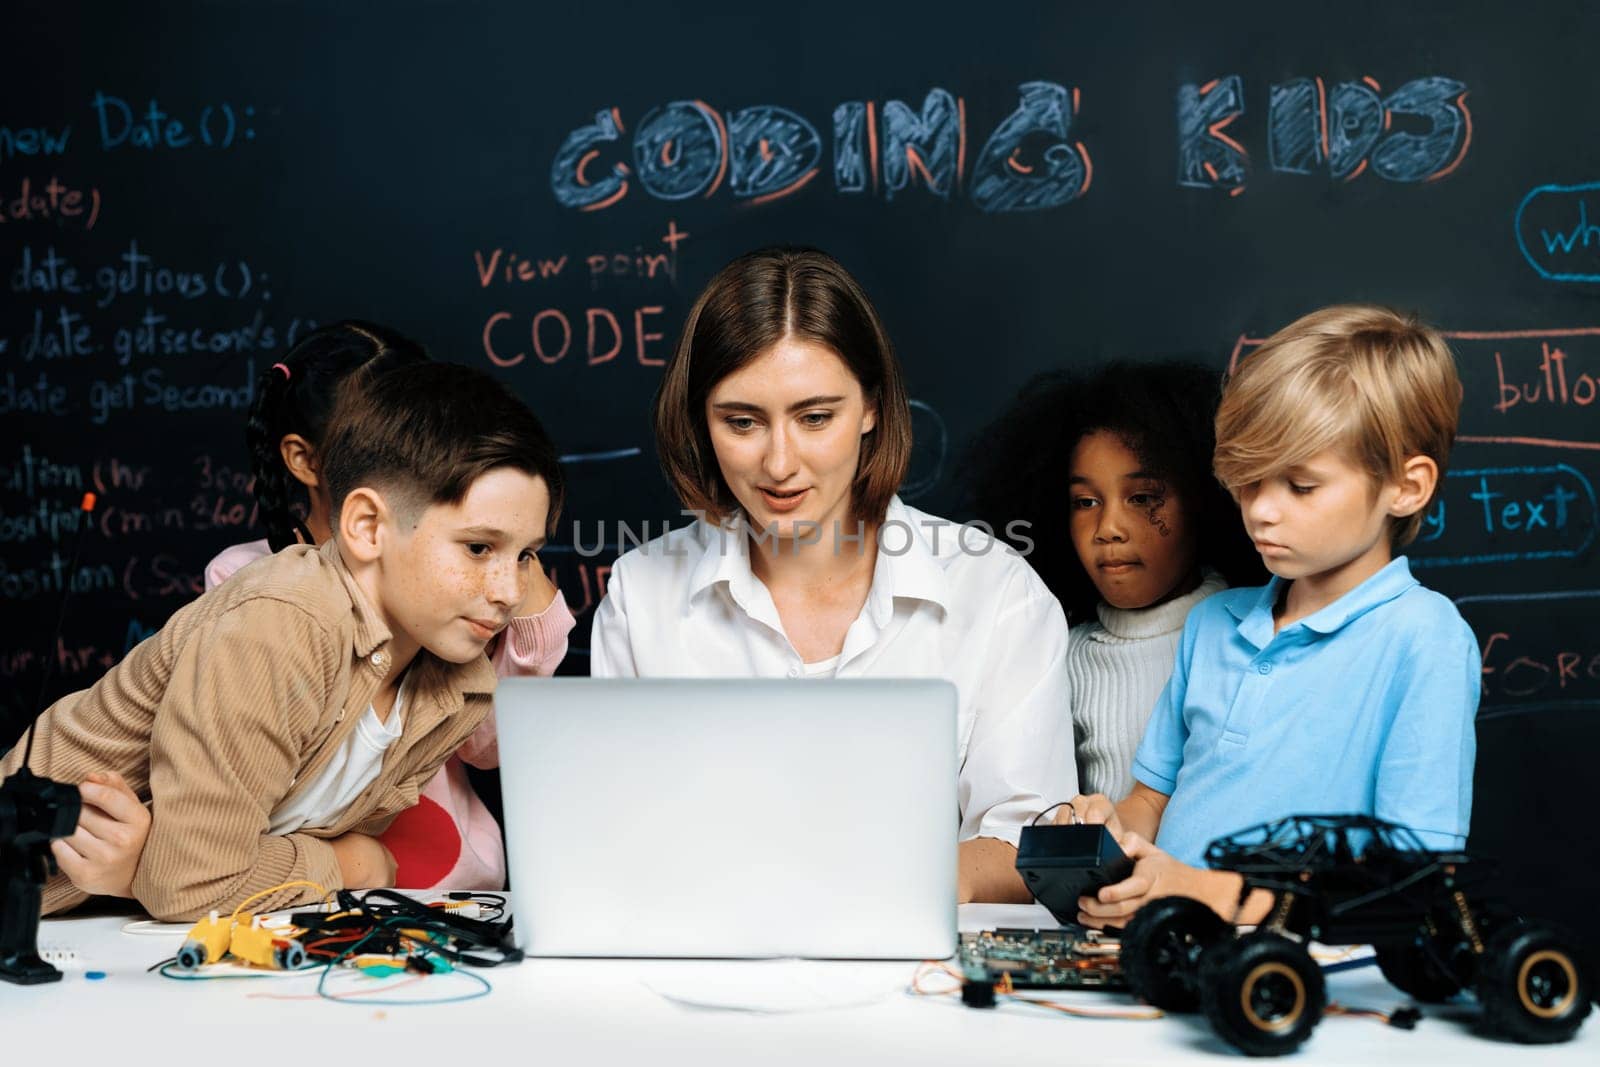 Teacher coding to demonstrate children how to code robots in the STEM class. Children fun to watch how teacher coding with confident only boy in blue shirt taking note with serious look. Erudition.